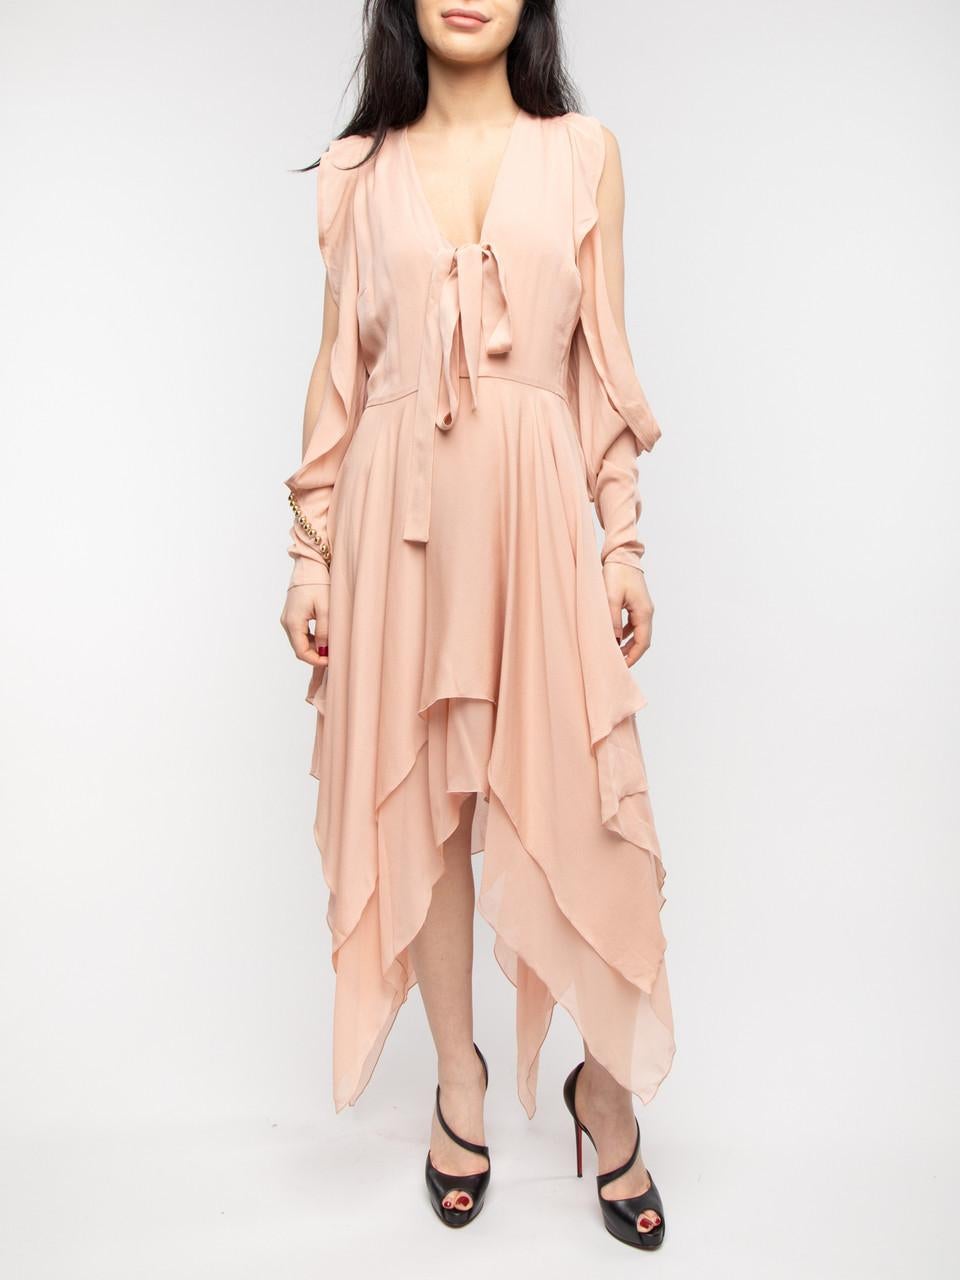 CONDITION is Good. Some wear and pilling to dress is evident. Slightly visible stains, some loose threads, damaged clothing labelon this used Elie Saab designer resale item. Details Pink Silk Assymetric Loose fit Long sleeves with ruffles & cut out